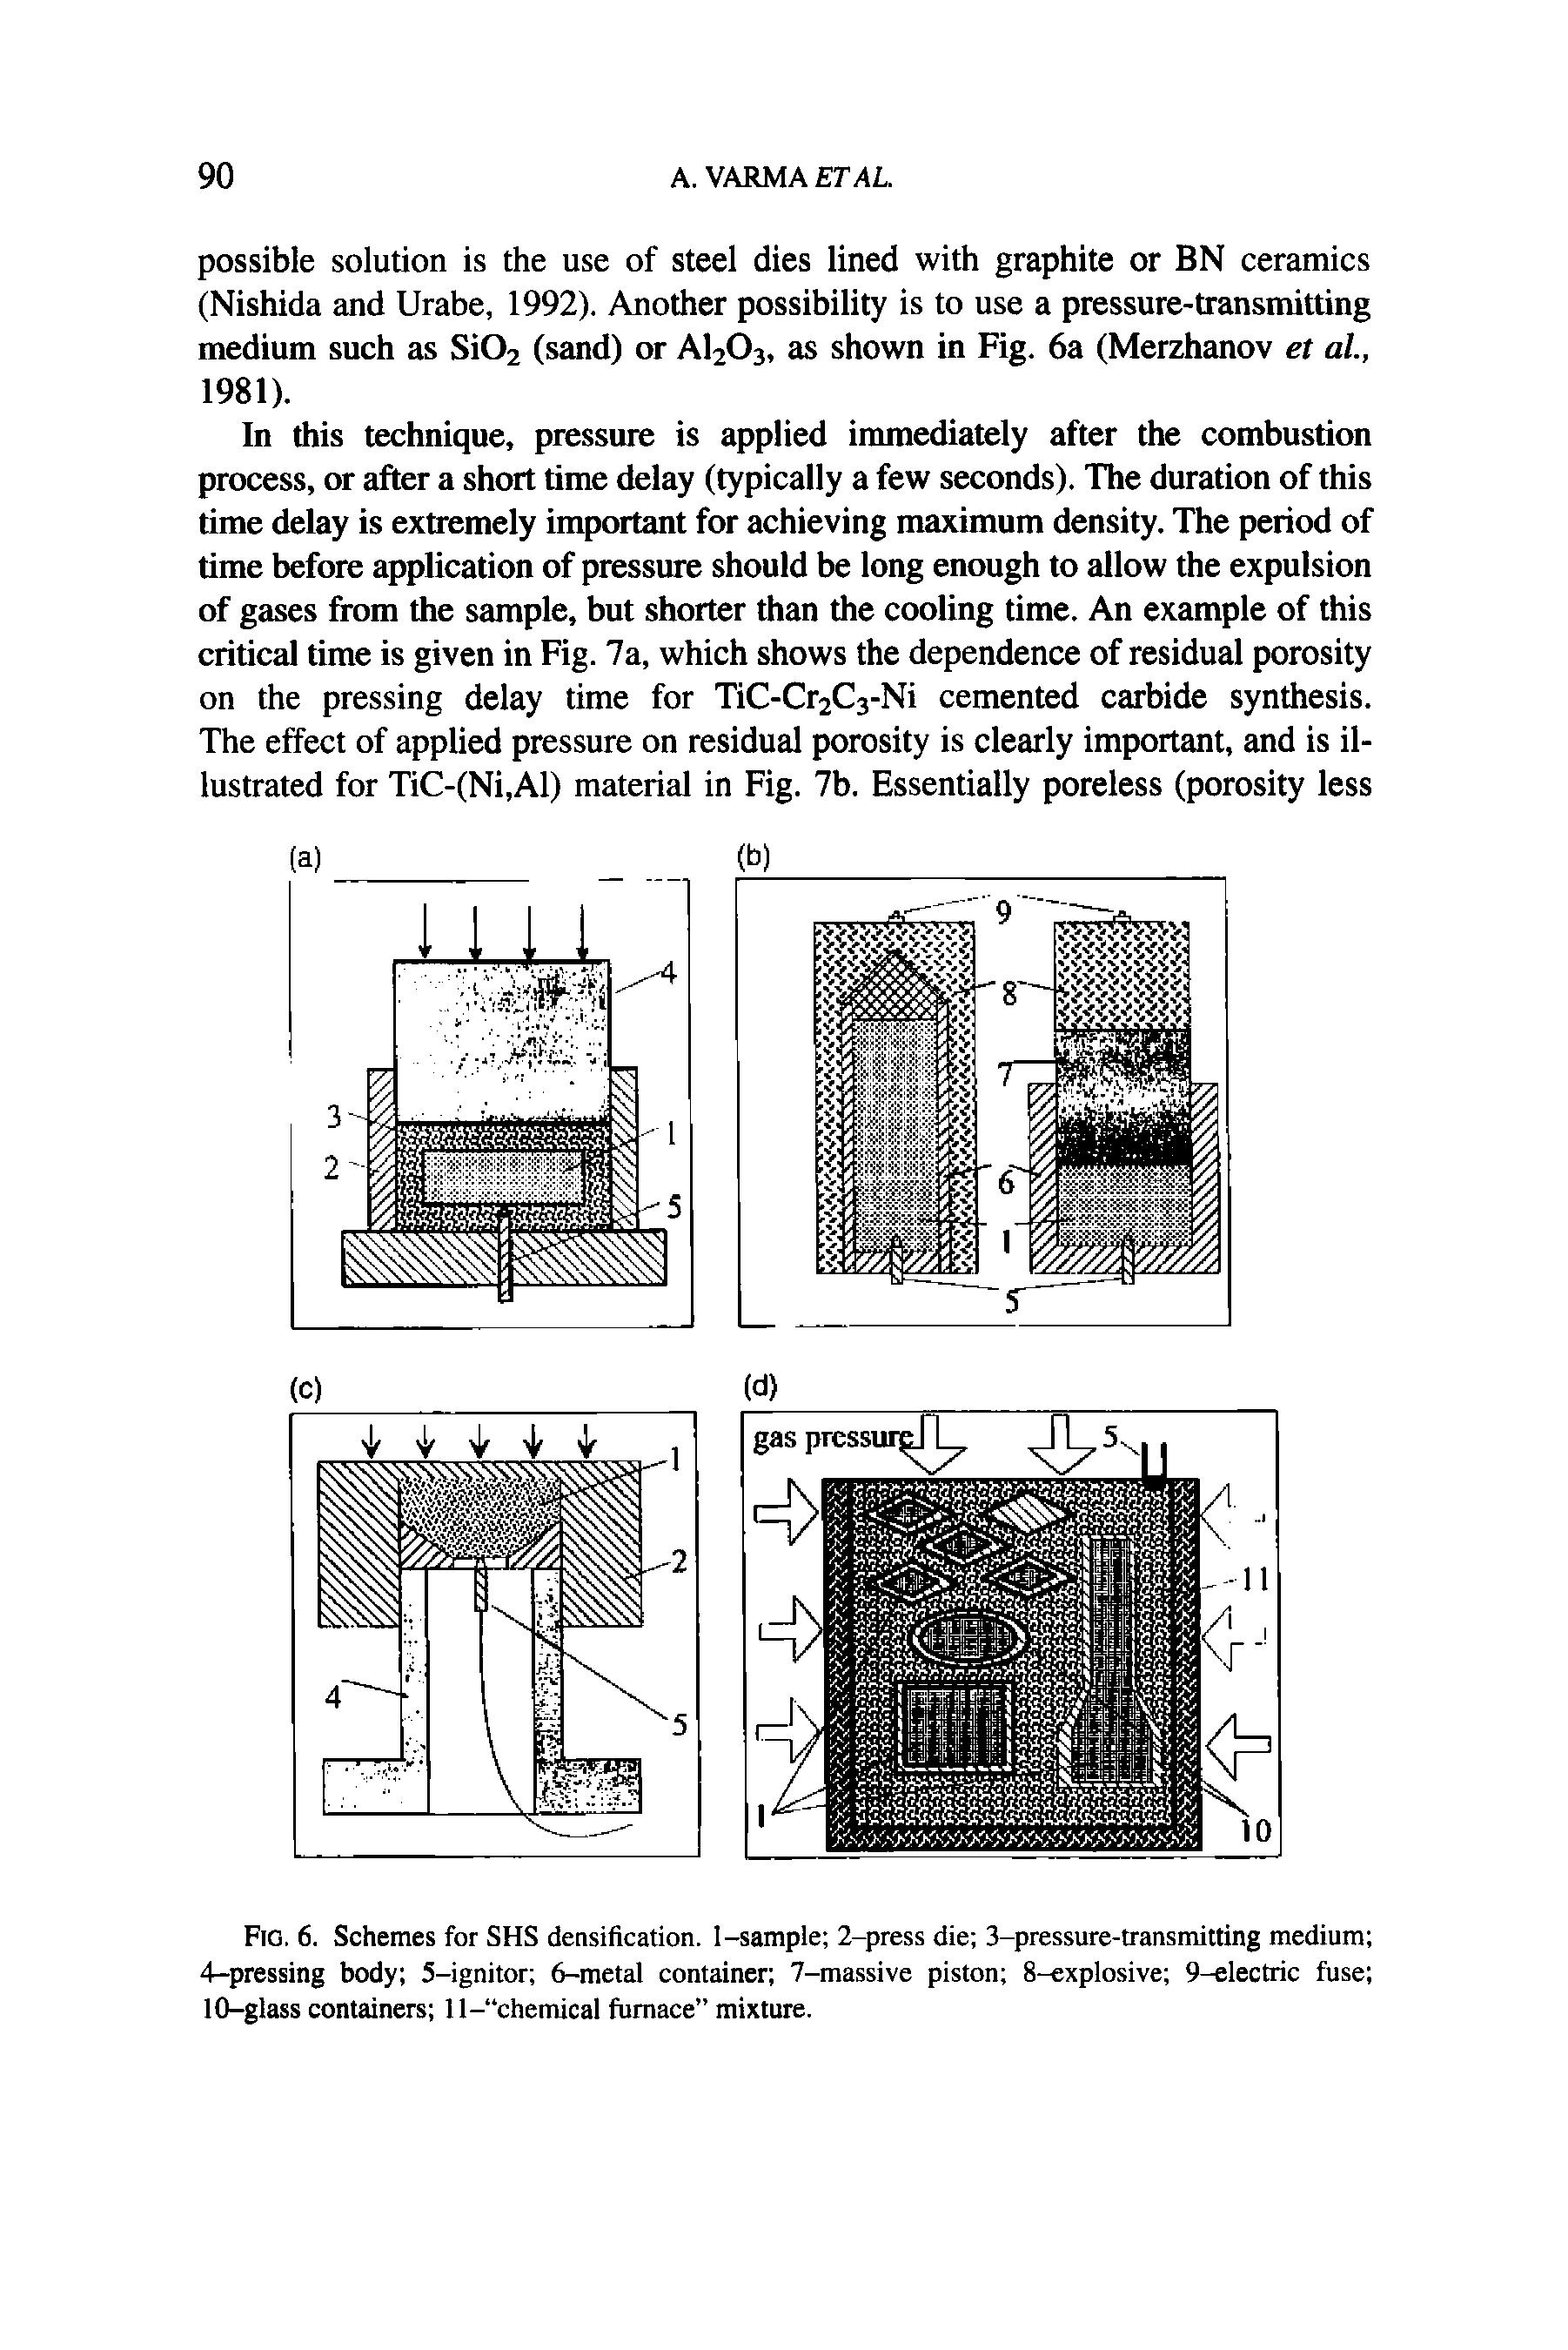 Fig. 6. Schemes for SHS densification. I-sample 2-press die 3-pressure-transmitting medium 4-pressing body 5-ignitor 6-metal container 7-massive piston 8-explosive 9-electric fuse 10-glass containers ll- chemical furnace mixture.